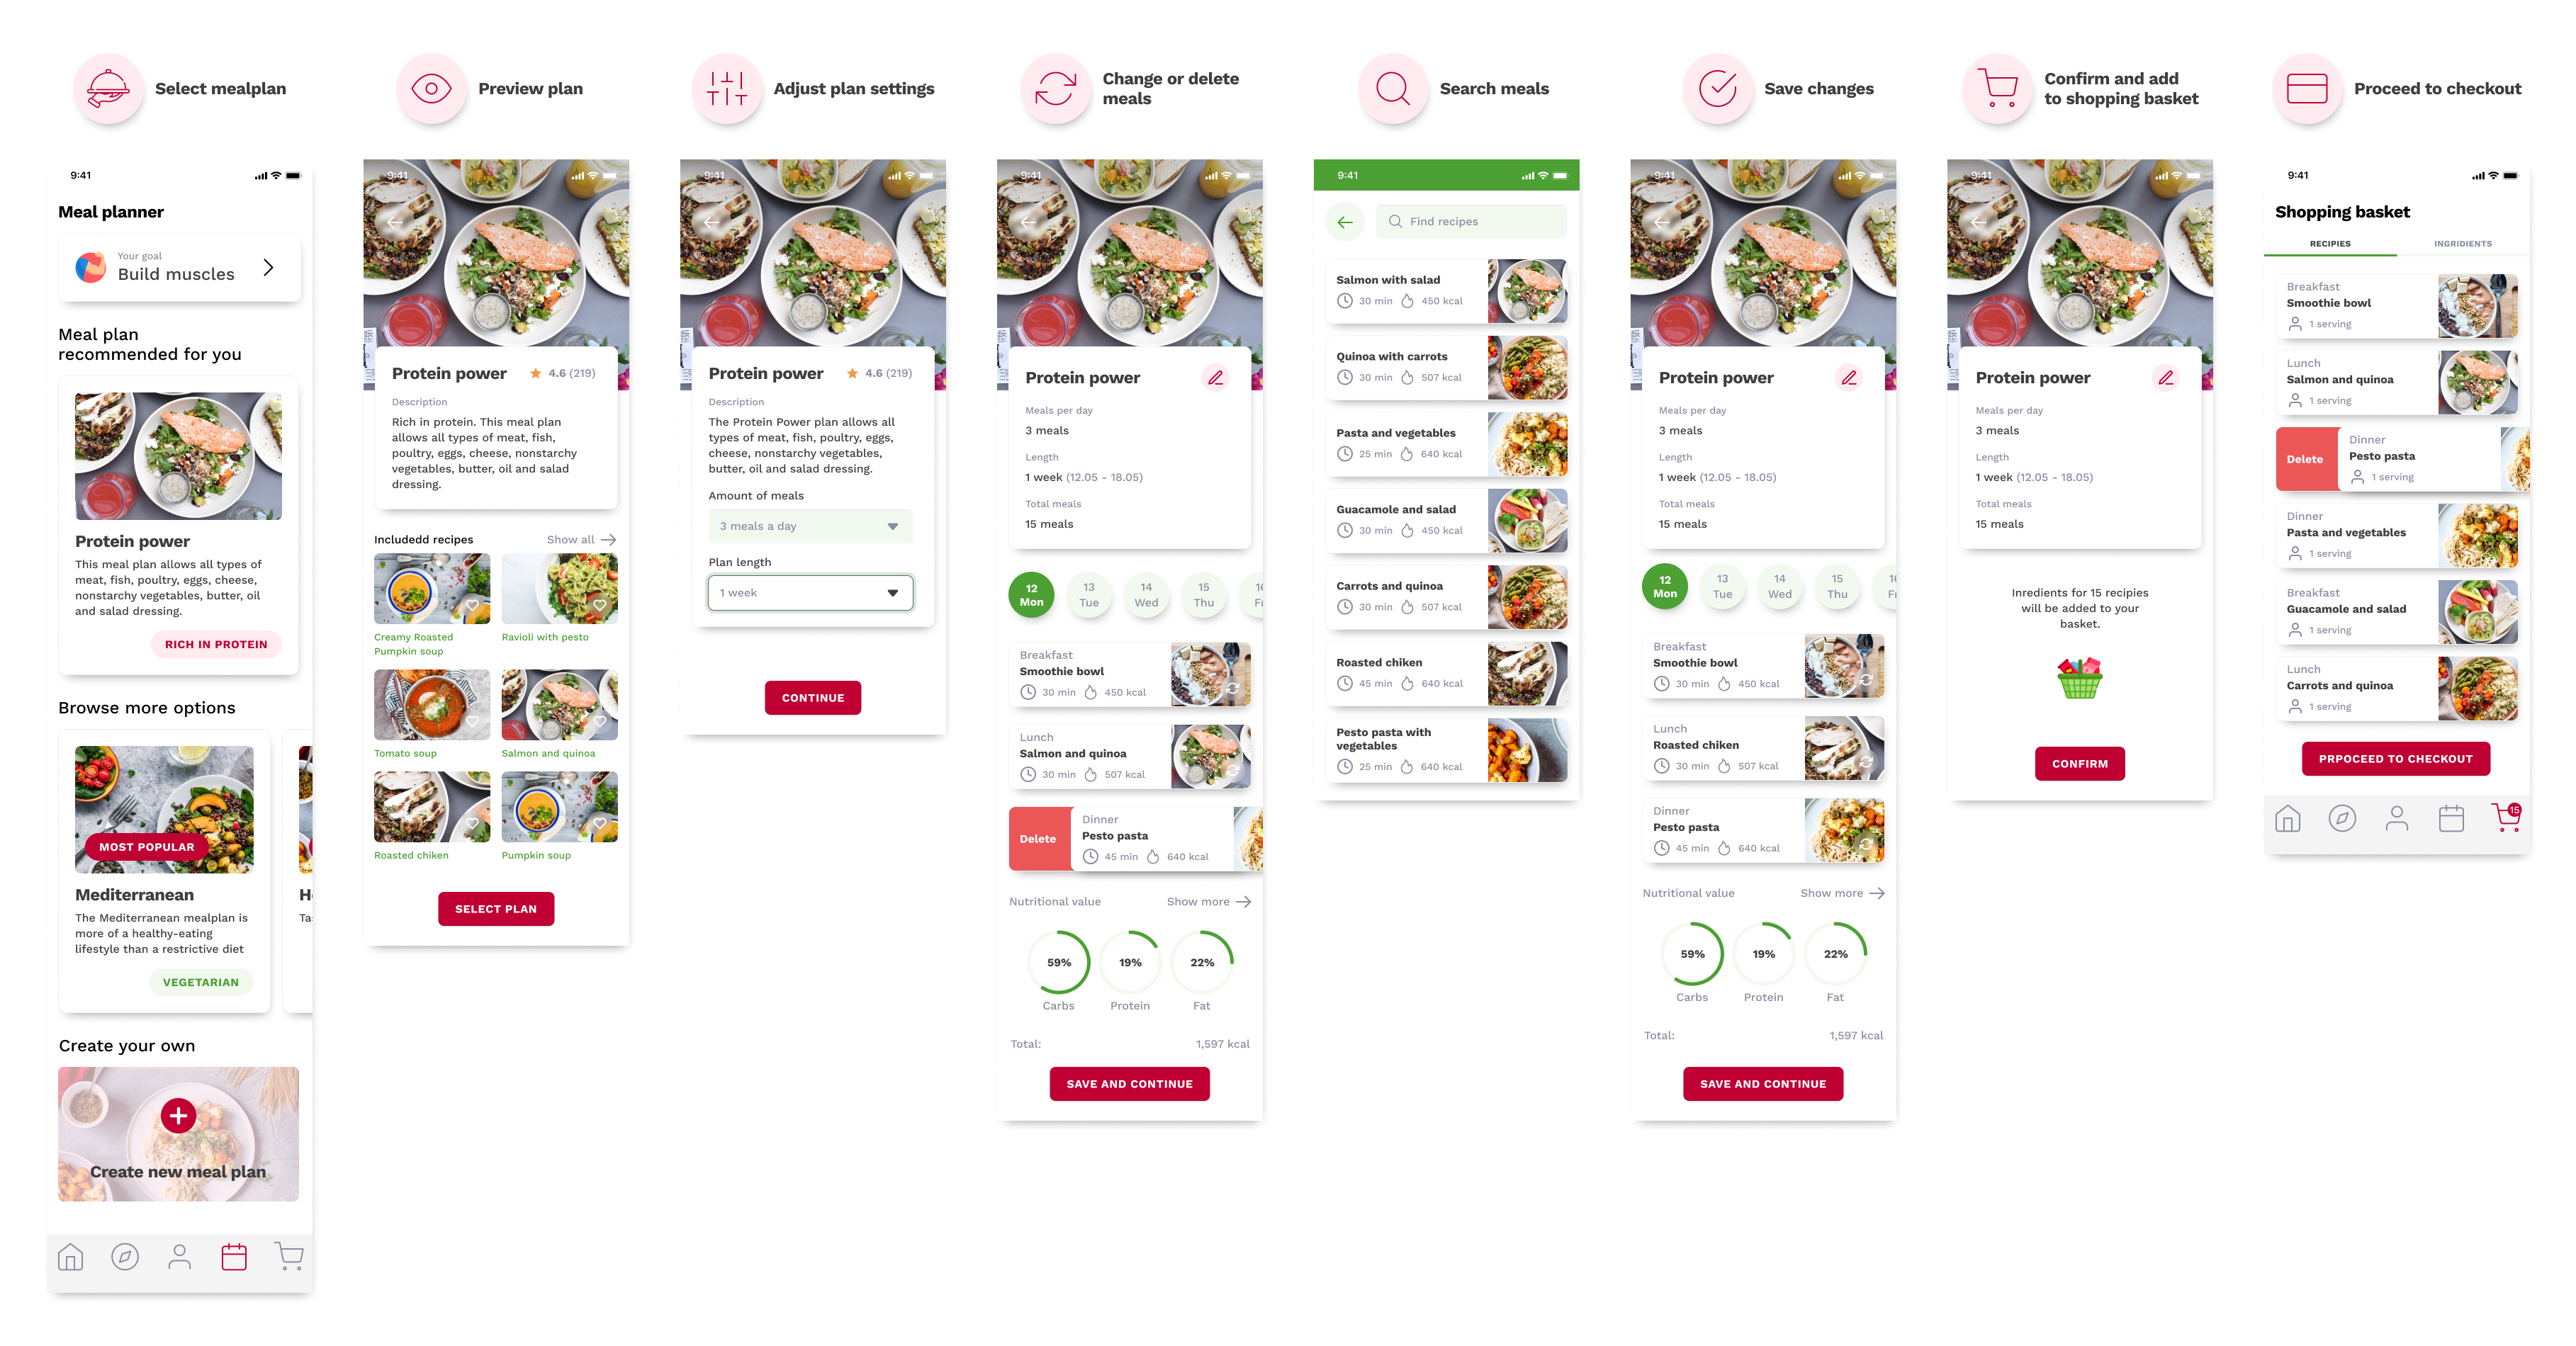 Predefined meal plans